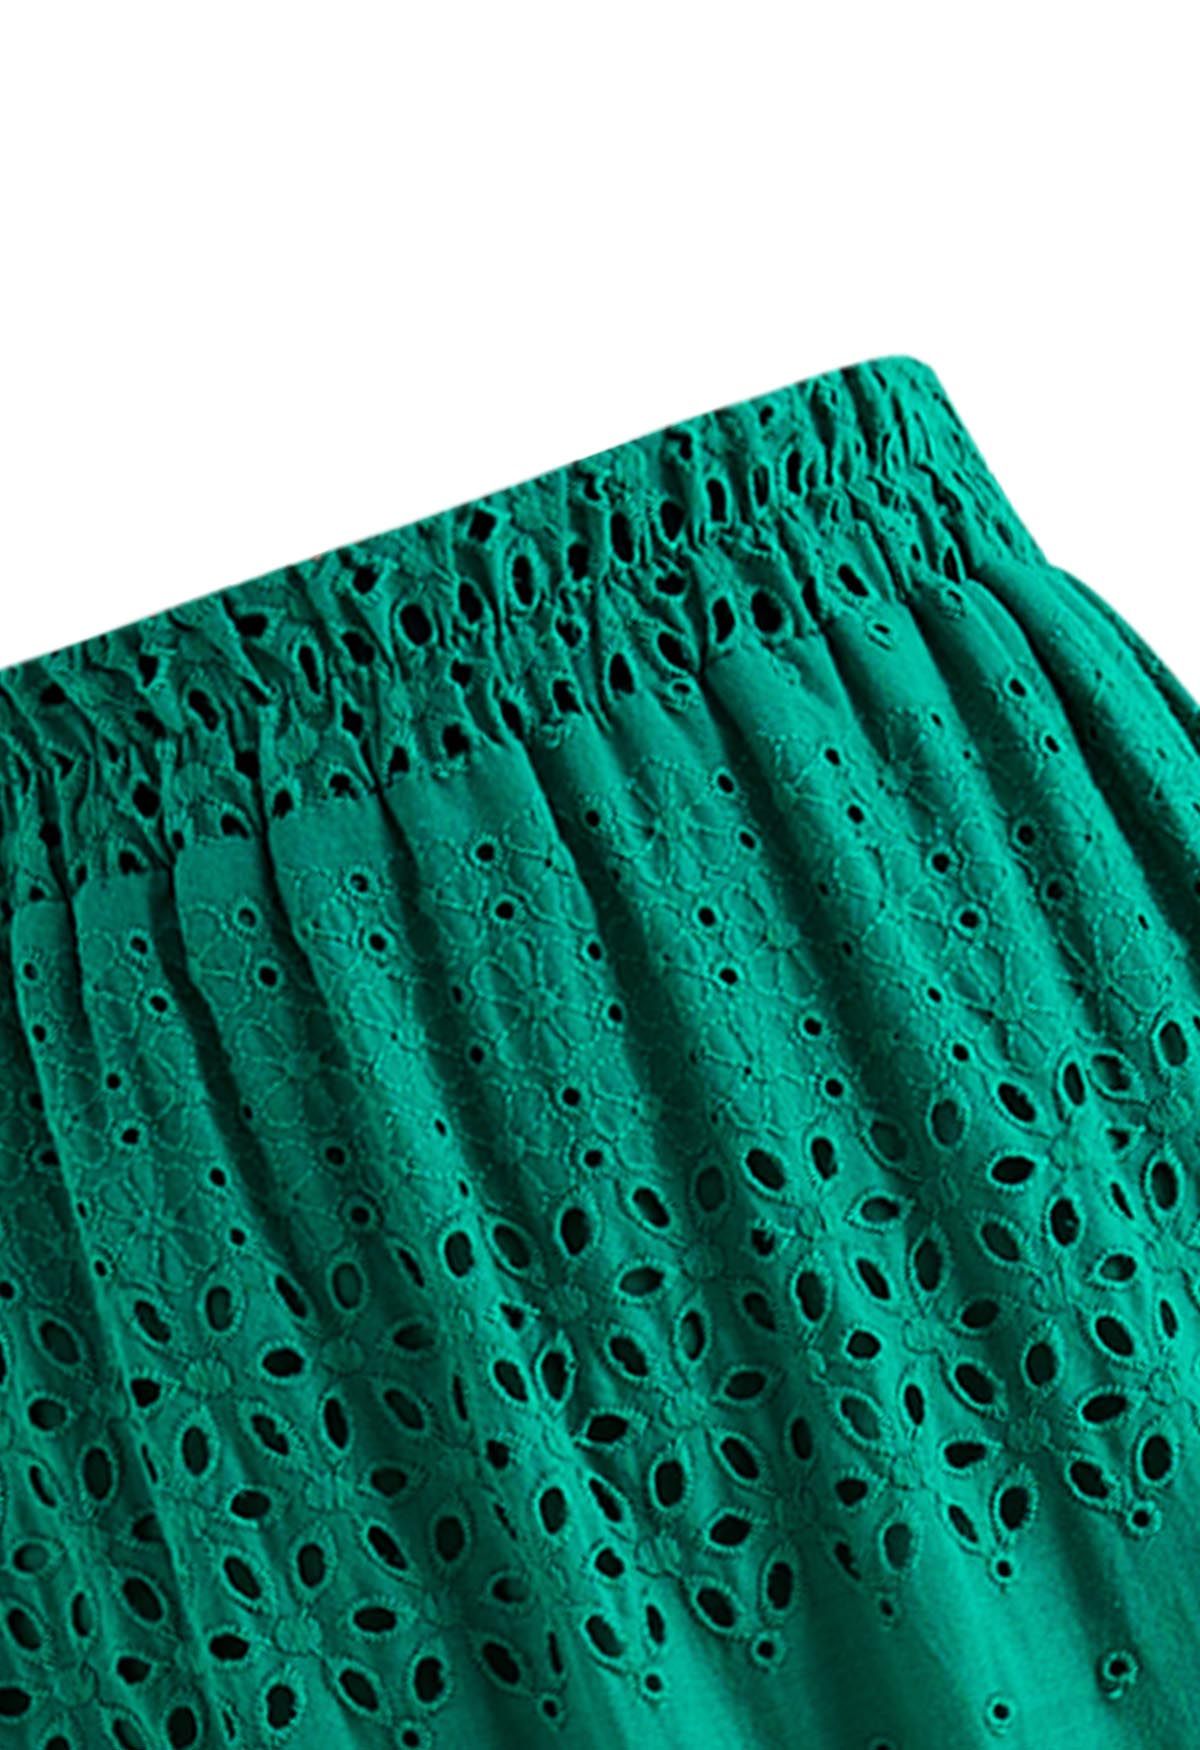 Floret Embroidered Eyelet Cotton Midi Skirt in Green